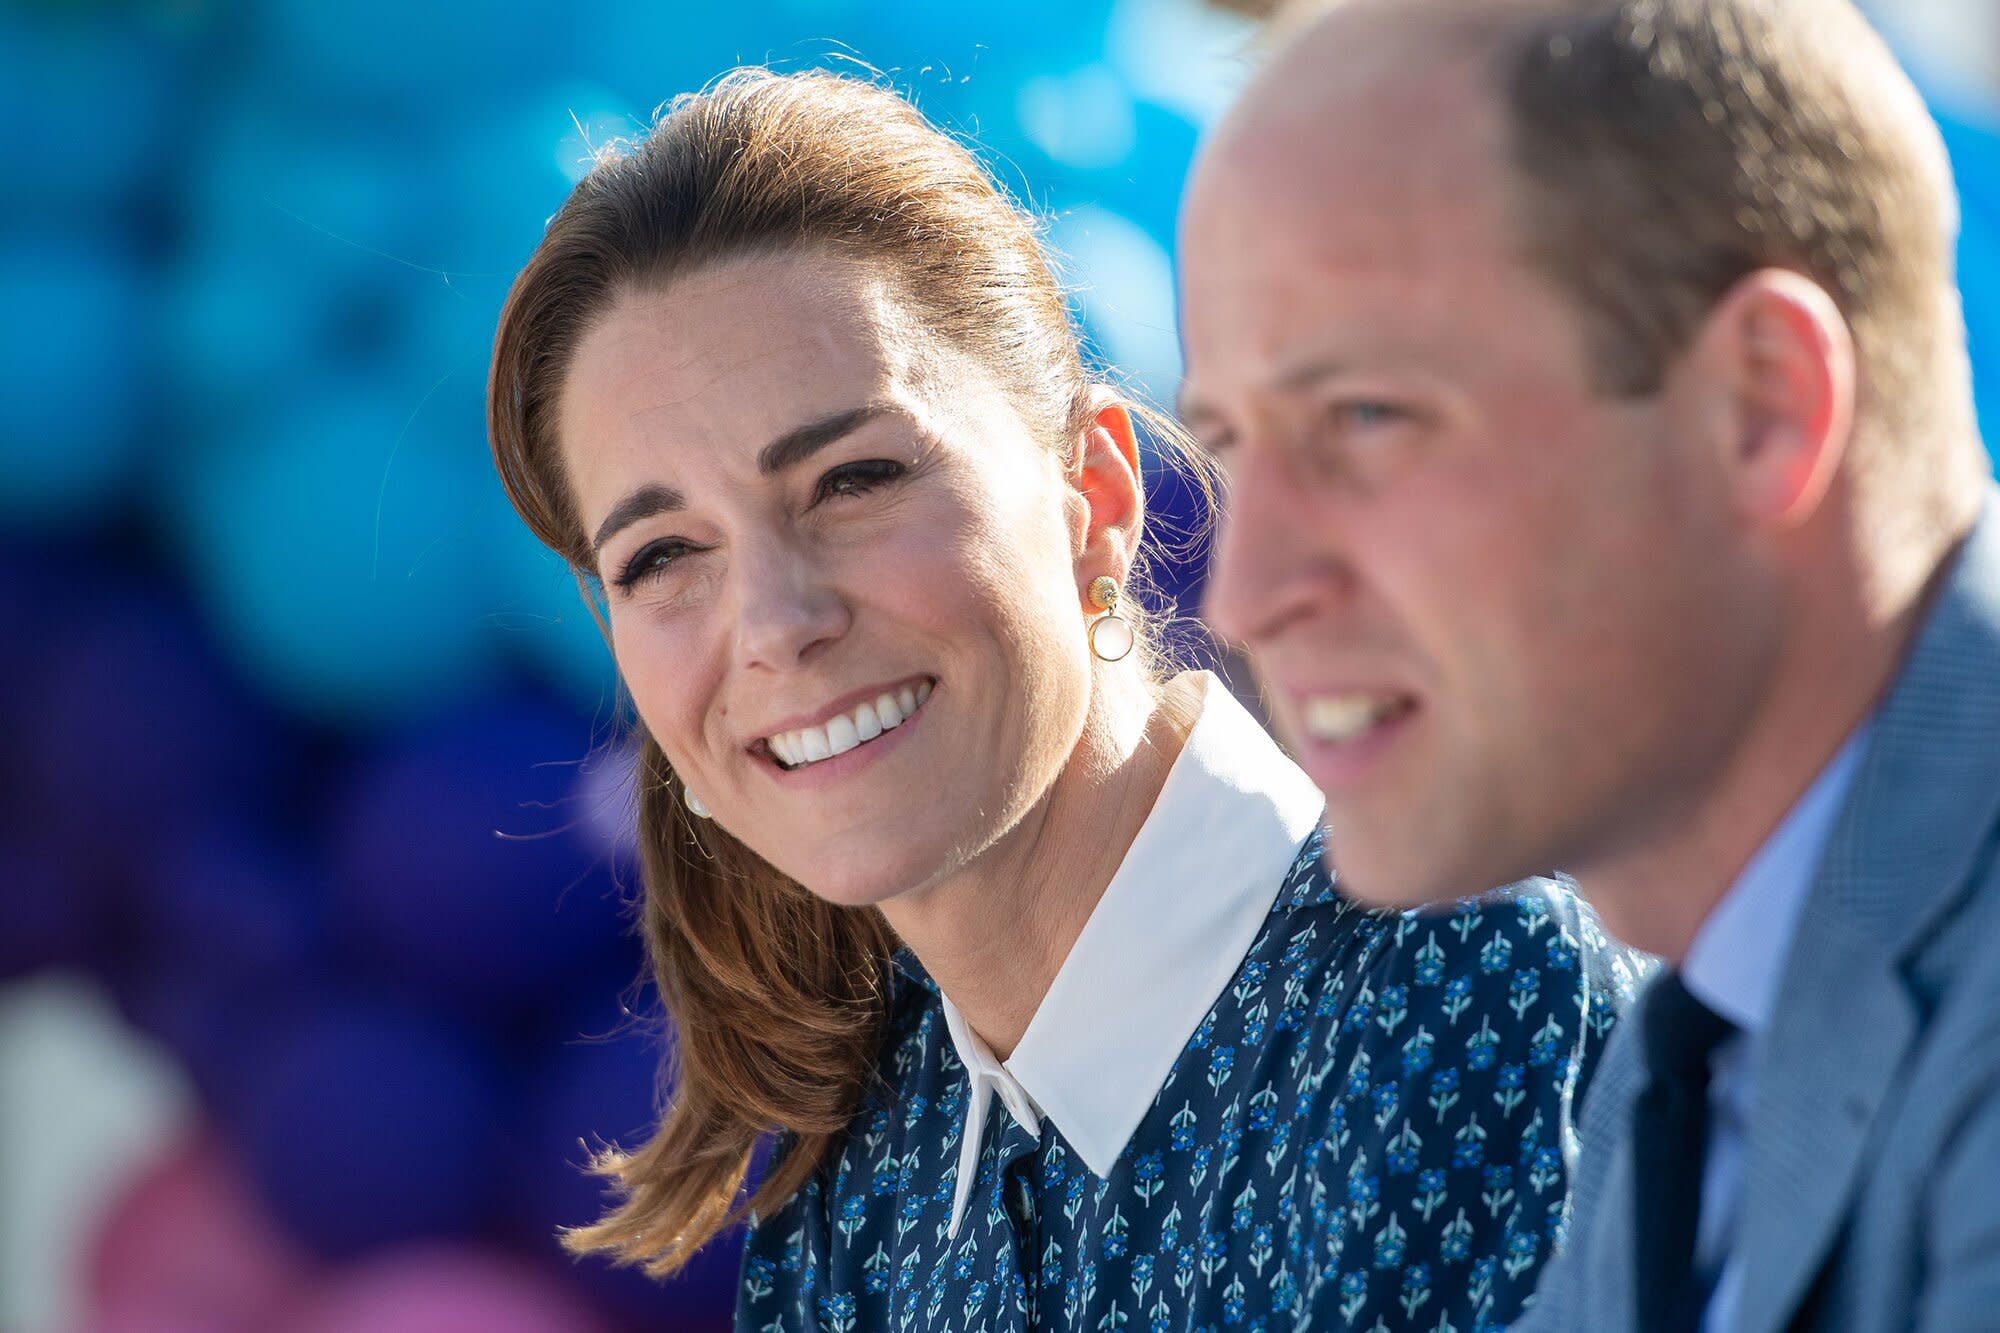 Prince William and Kate Middleton Make Special Visit to Mark National Health Service’s 72nd Birthday